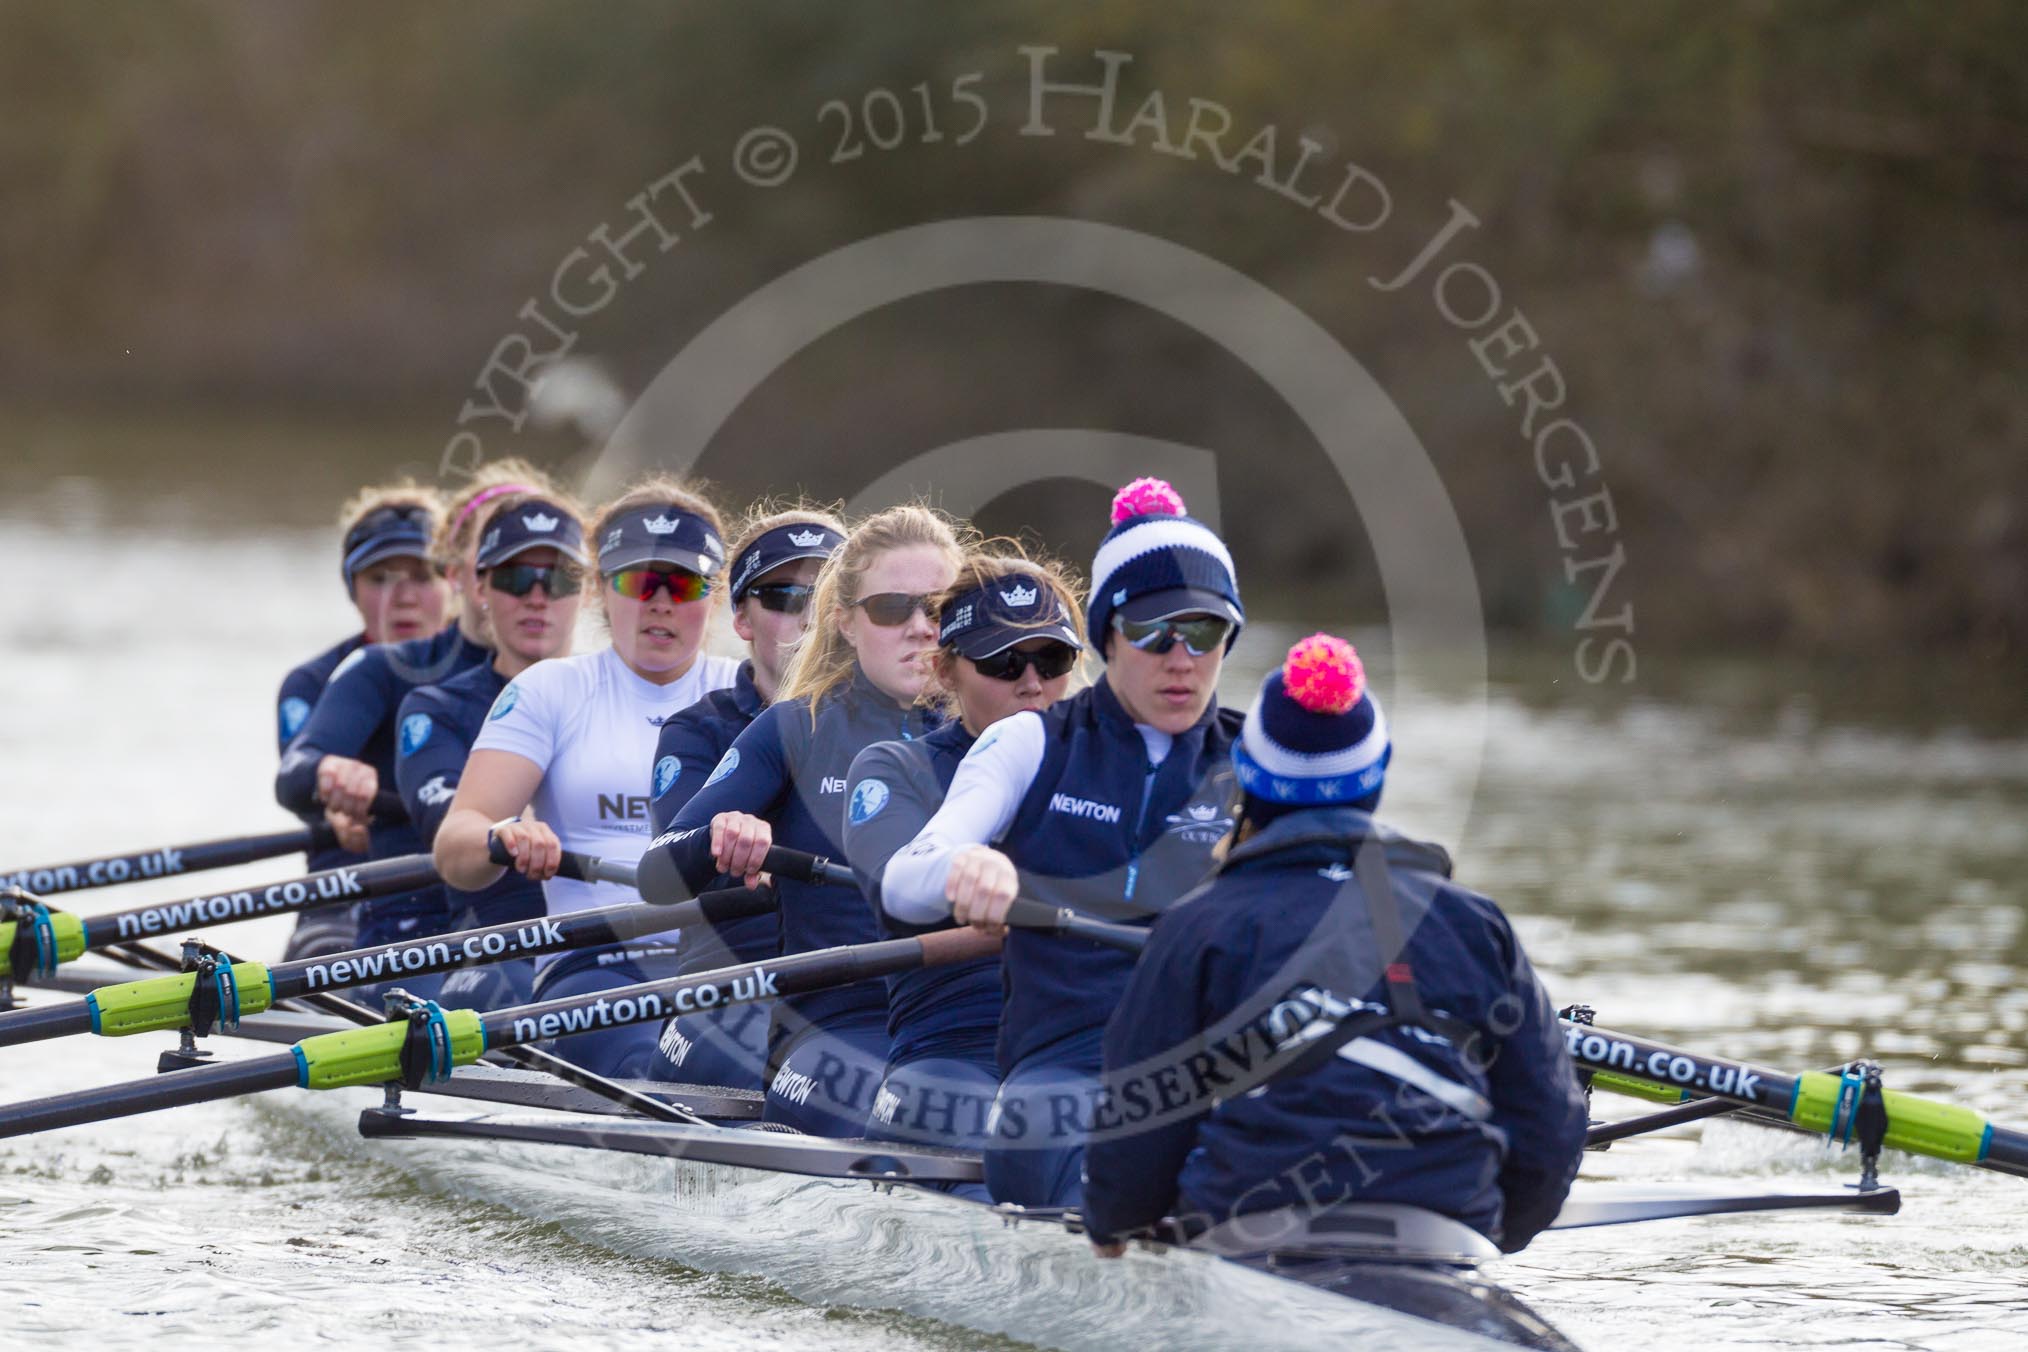 The Boat Race season 2015: OUWBC training Wallingford.

Wallingford,

United Kingdom,
on 04 March 2015 at 15:39, image #35